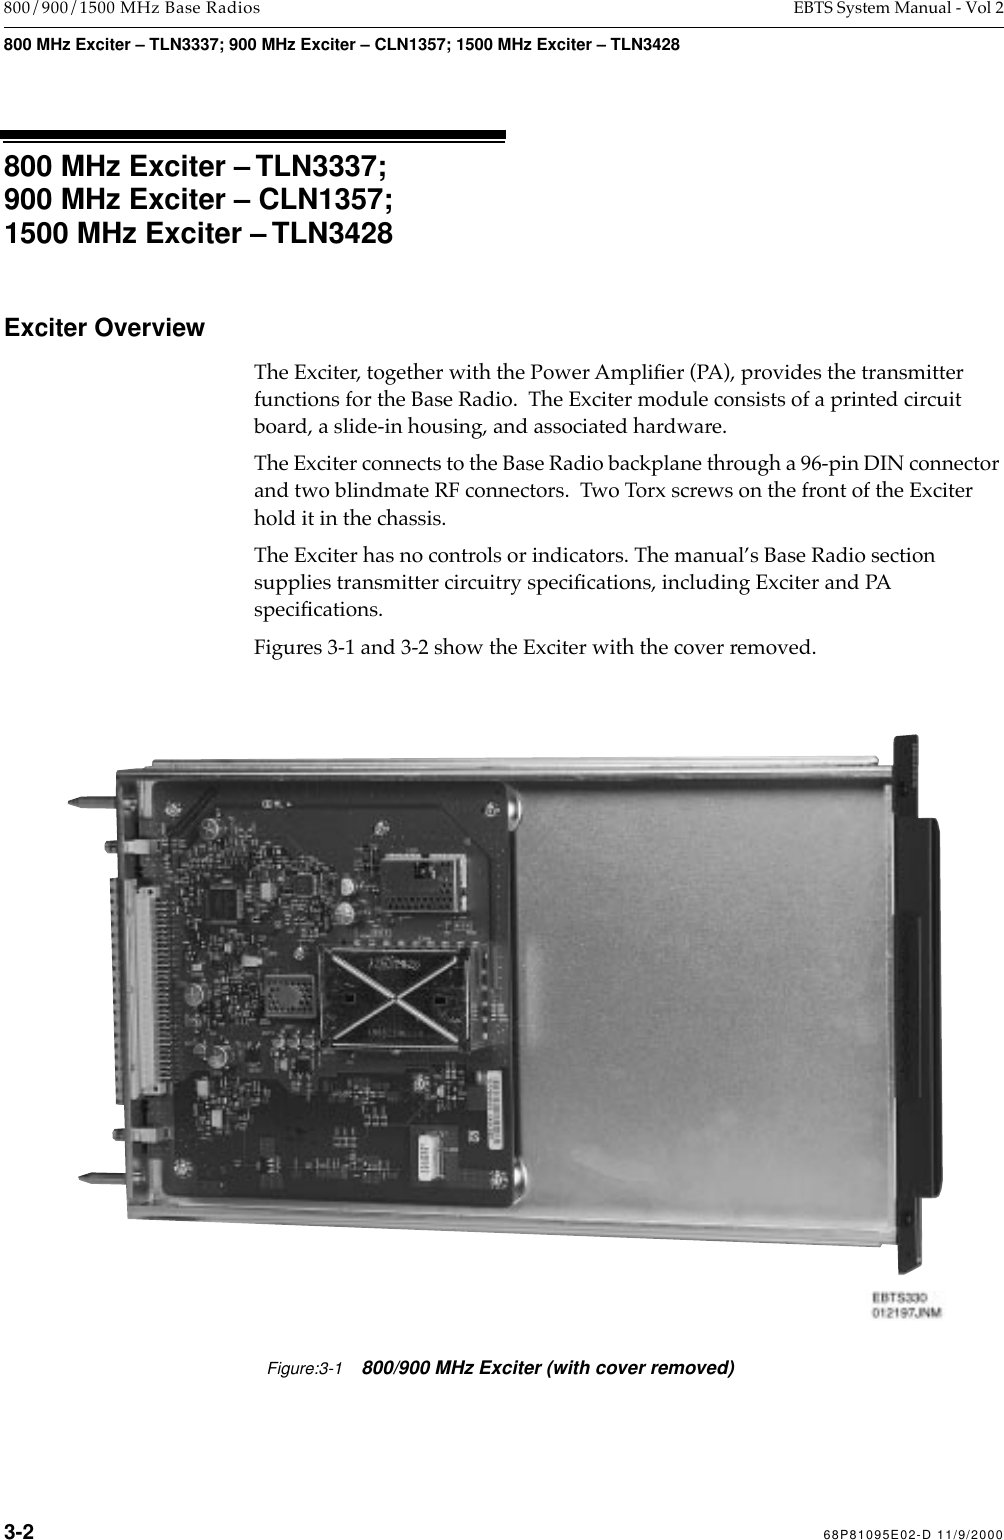  3-2 68P81095E02-D 11/9/2000 800/900/1500 MHz Base Radios EBTS System Manual - Vol 2 800 MHz Exciter – TLN3337; 900 MHz Exciter – CLN1357; 1500 MHz Exciter – TLN3428 800 MHz Exciter – TLN3337;900 MHz Exciter – CLN1357;1500 MHz Exciter – TLN3428 Exciter Overview The Exciter, together with the Power AmpliÞer (PA), provides the transmitter functions for the Base Radio.  The Exciter module consists of a printed circuit board, a slide-in housing, and associated hardware. The Exciter connects to the Base Radio backplane through a 96-pin DIN connector and two blindmate RF connectors.  Two   Torx screws on the front of the Exciter hold it in the chassis. The Exciter has no controls or indicators. The manualÕs Base Radio section supplies transmitter circuitry speciÞcations, including Exciter and PA speciÞcations.Figures 3-1 and 3-2 show the Exciter with the cover removed.Figure:3-1800/900 MHz Exciter (with cover removed)